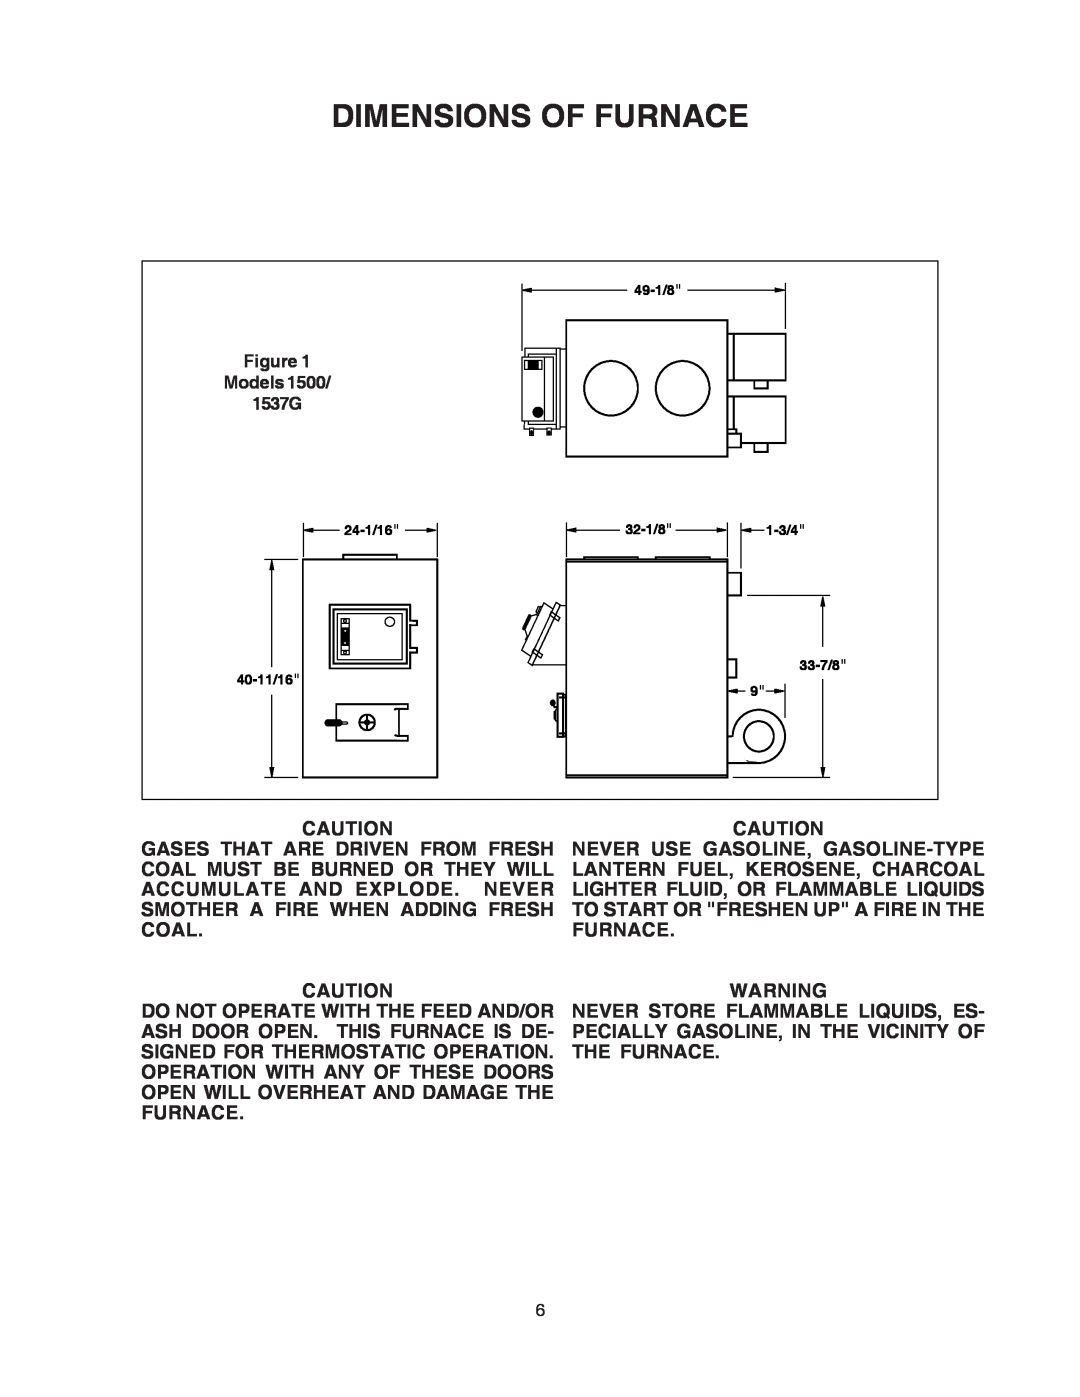 United States Stove 1500 owner manual Dimensions Of Furnace, 1537G 